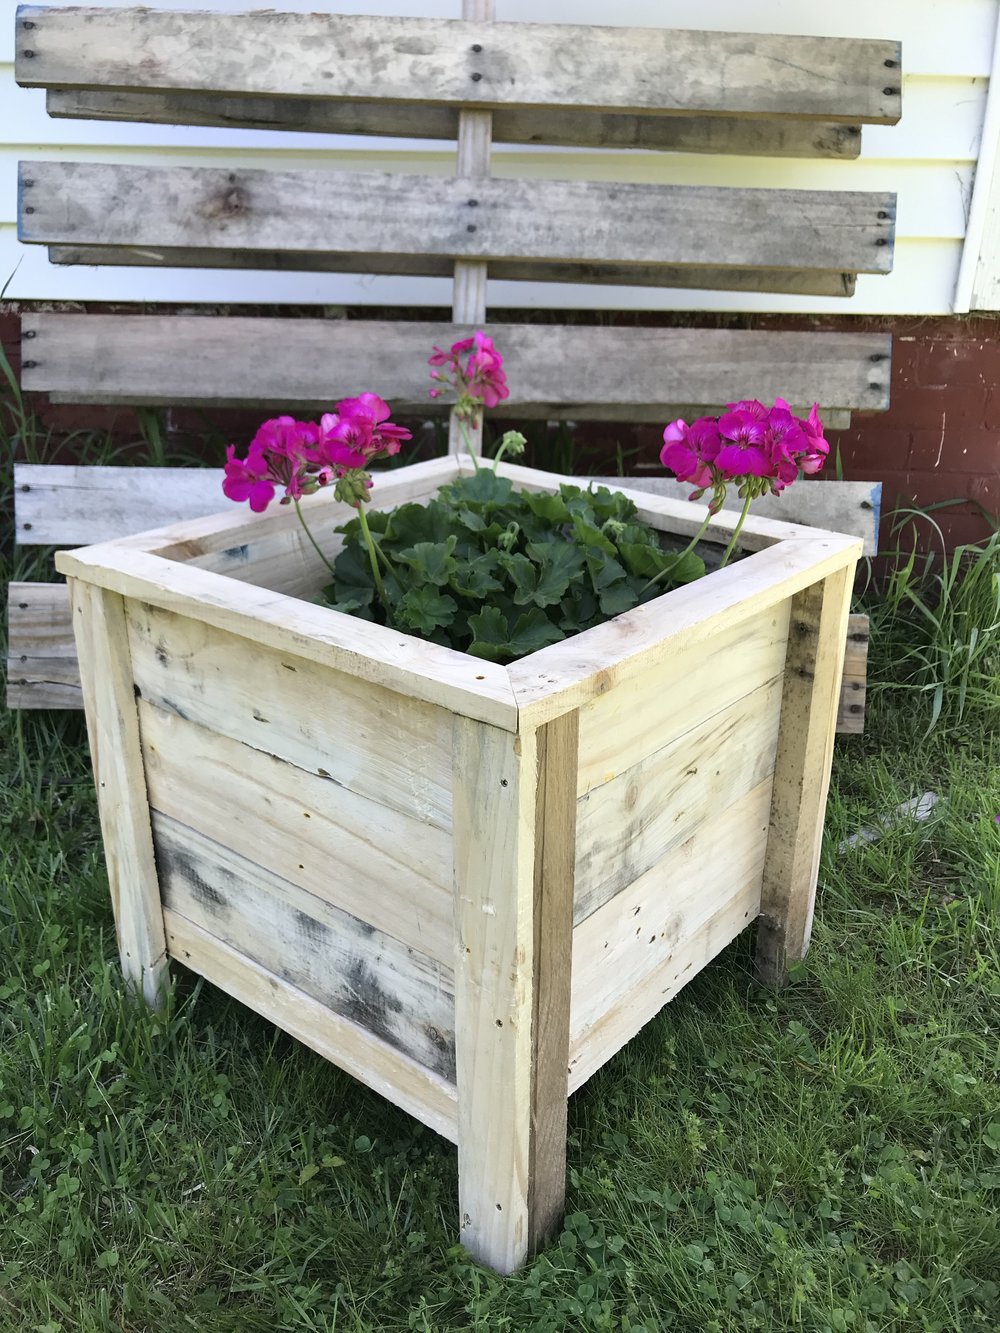 Reclaimed Wood Planters Bespoke Made To Order By Wood And Broome Design